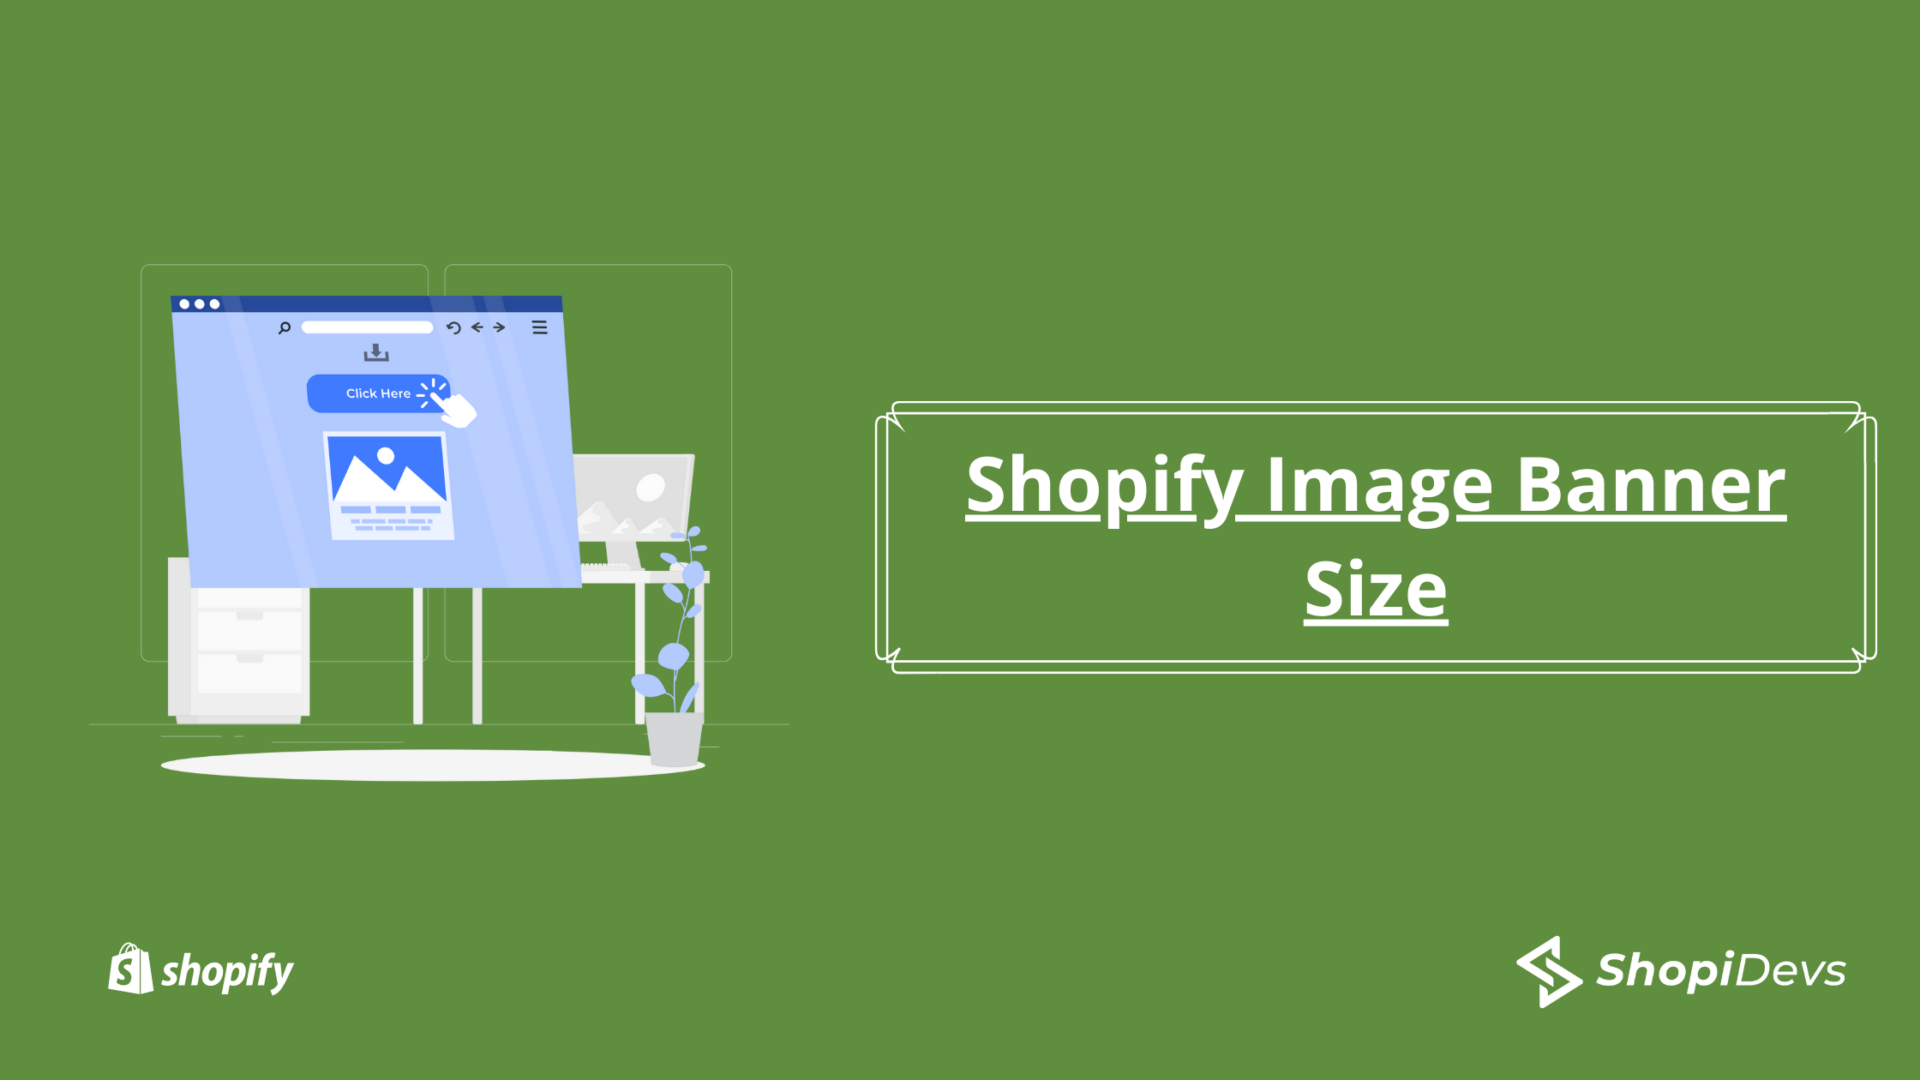 Shopify Image Banner Size